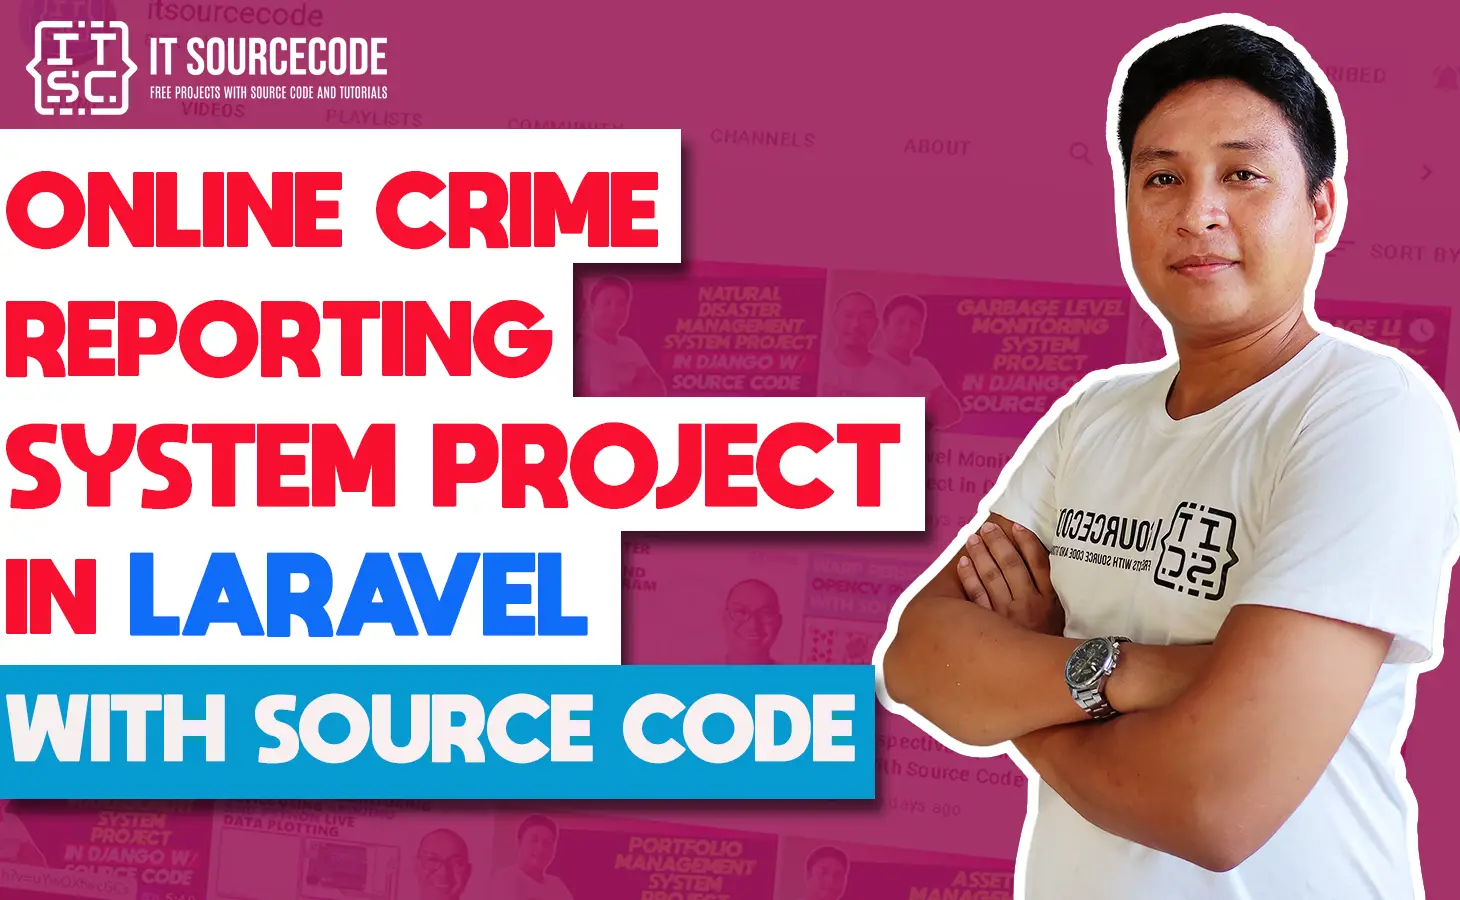 Online Crime Reporting System Project in Laravel with Source Code